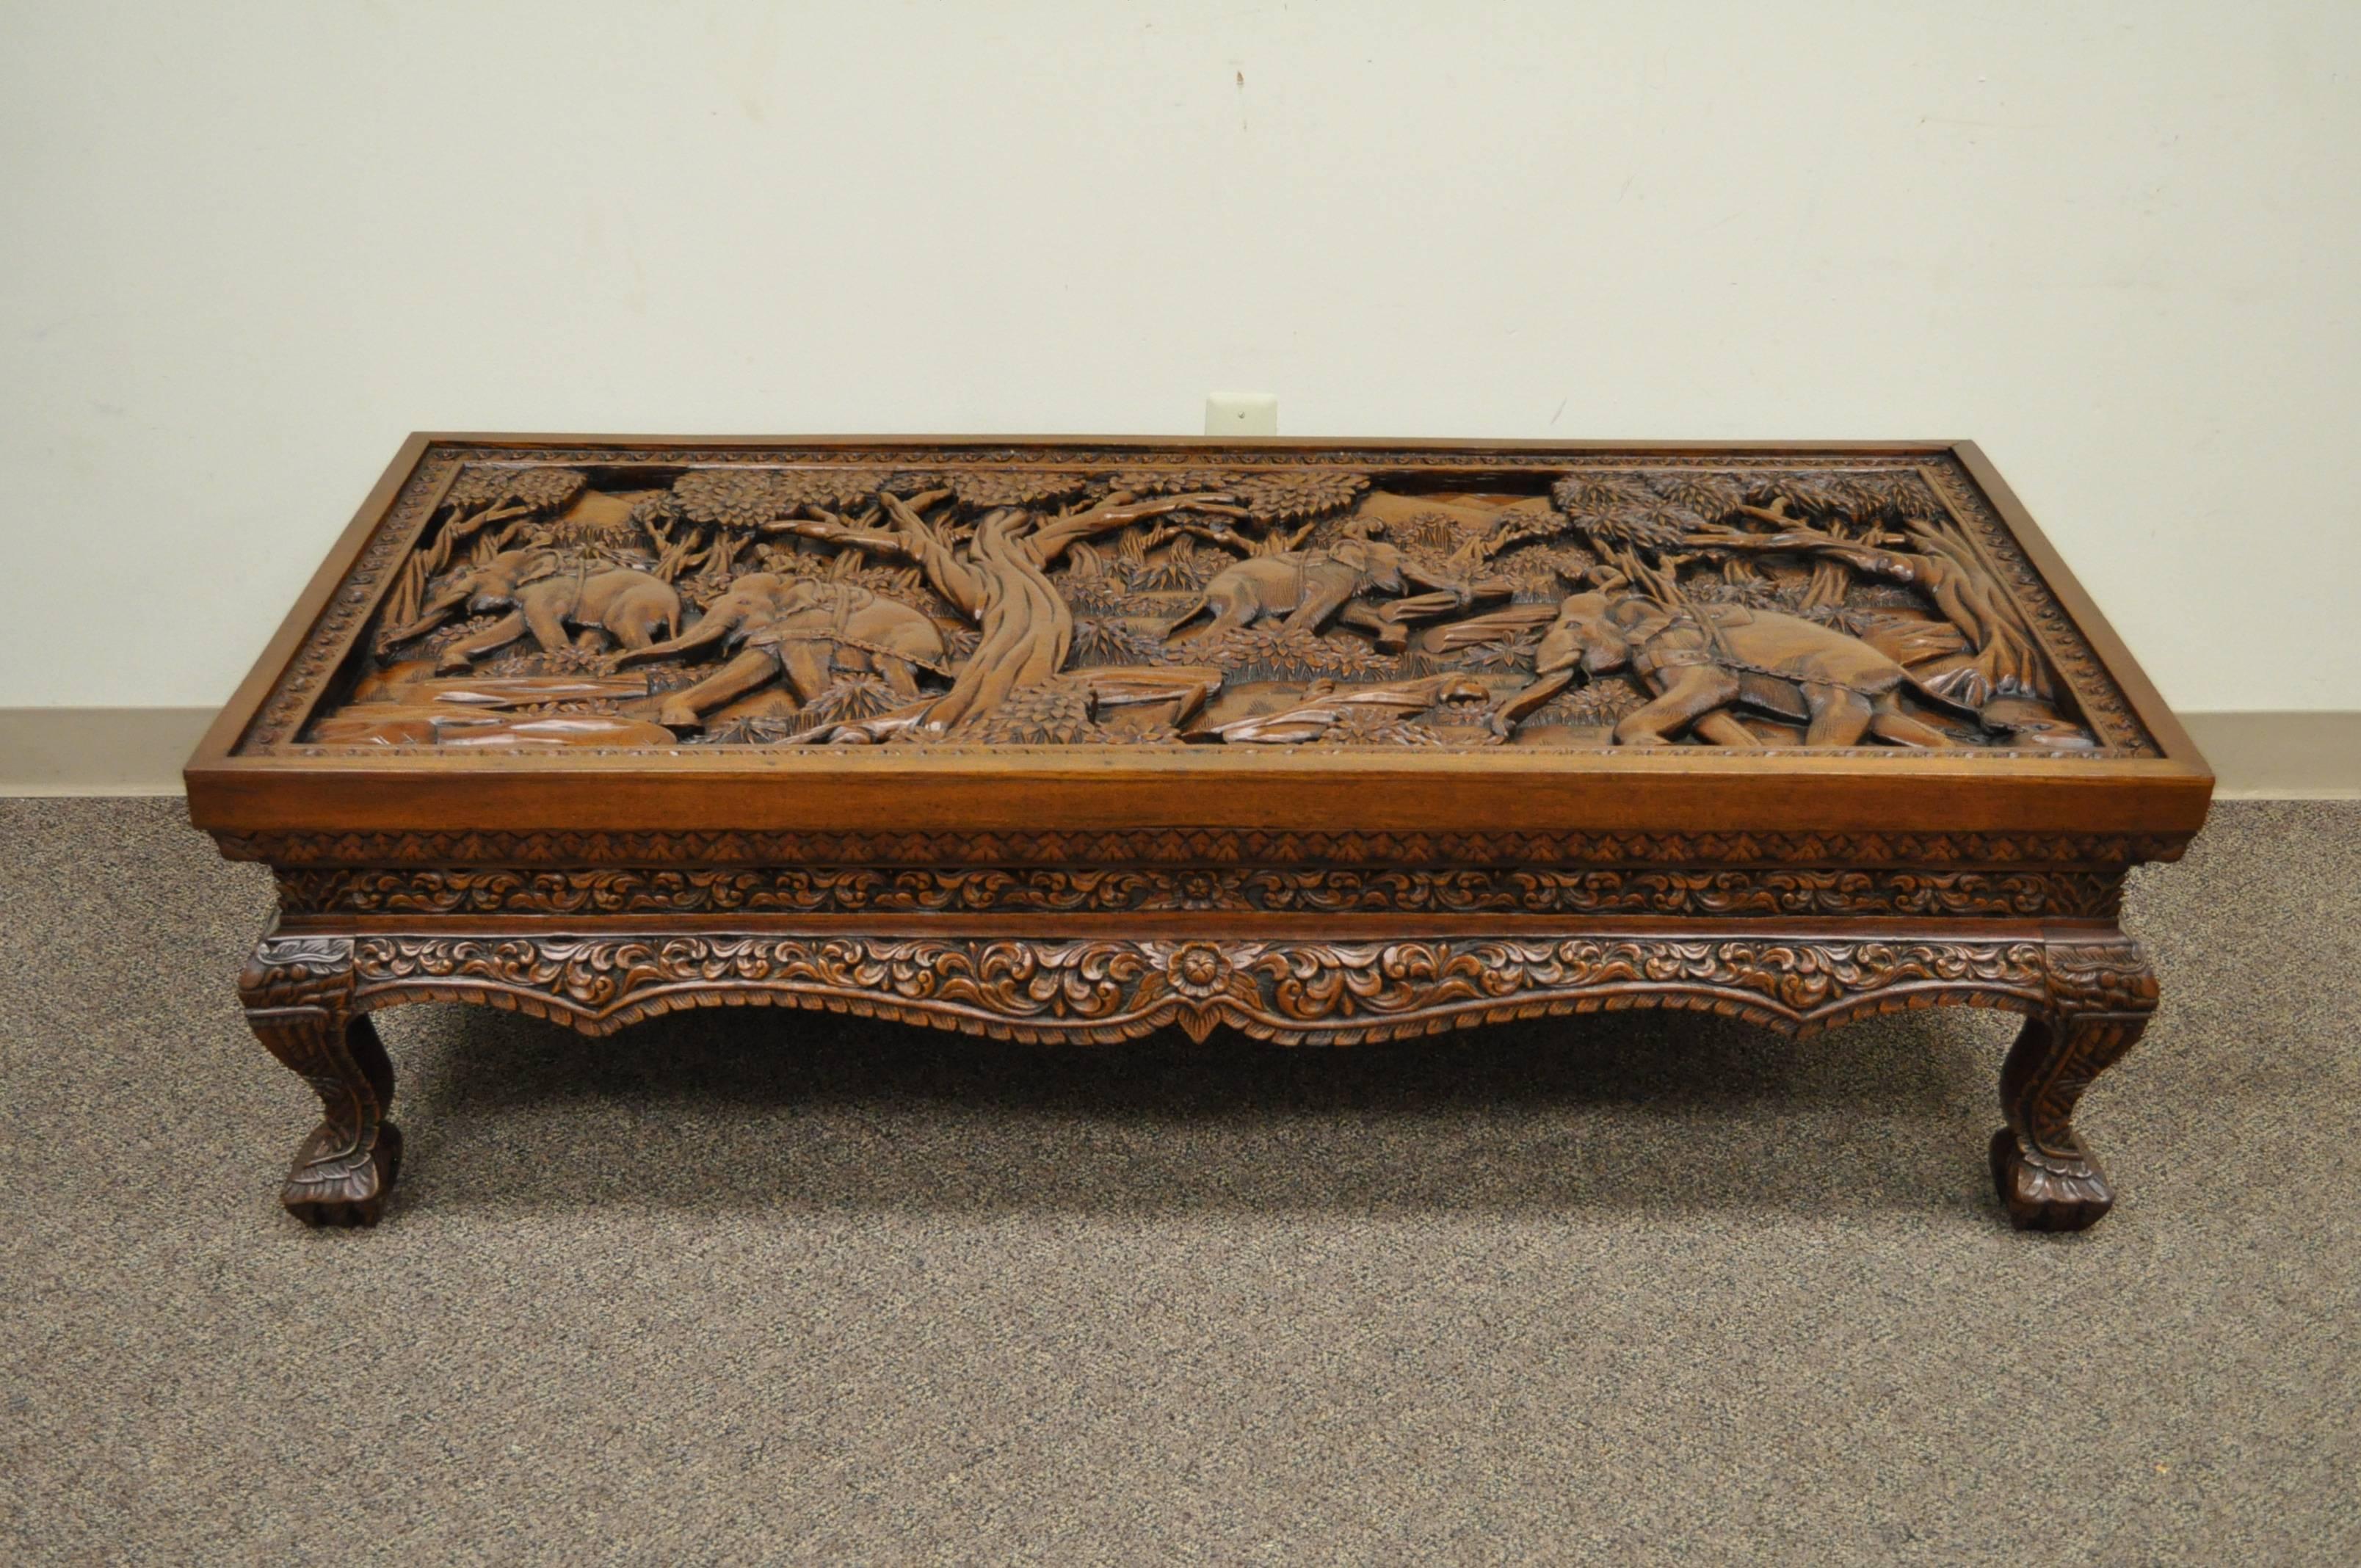 20th Century Vietnamese Hand-Carved Asian Coffee Low Table with Elephant Scene For Sale 1